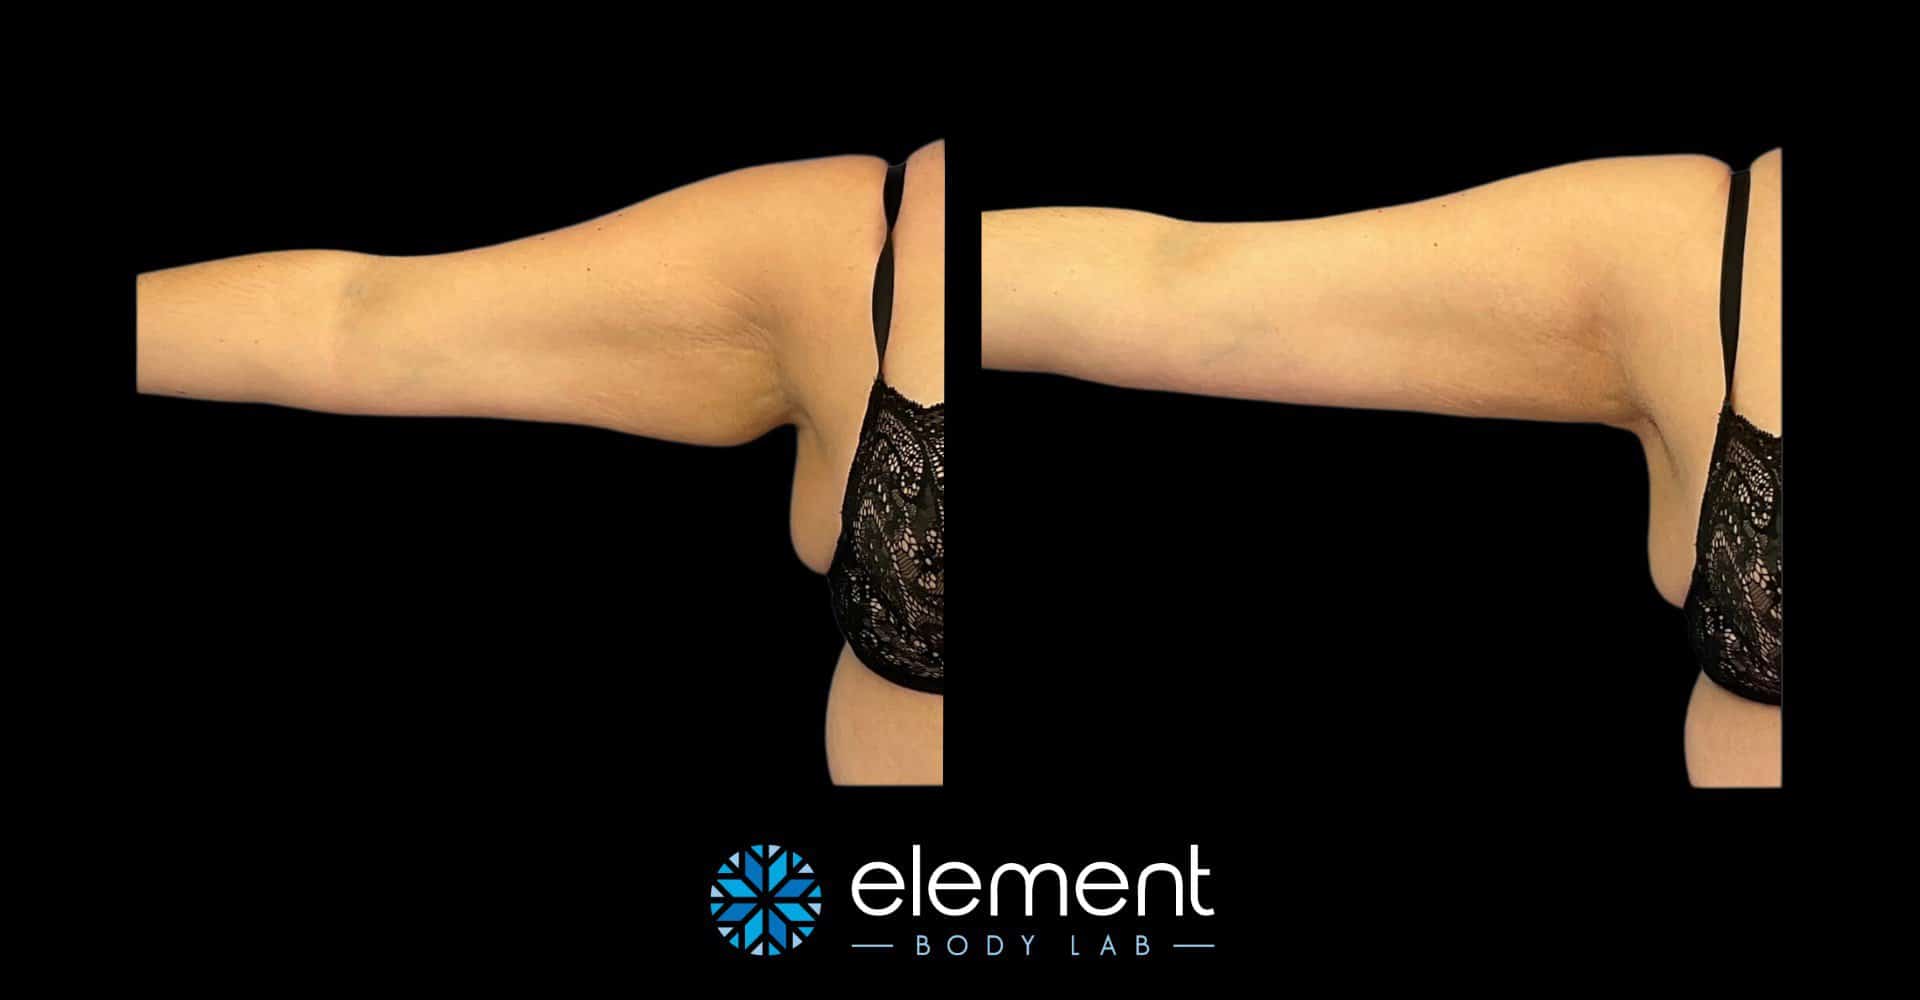 Coolsculpting Results in Dallas, TX – Before and After Photos